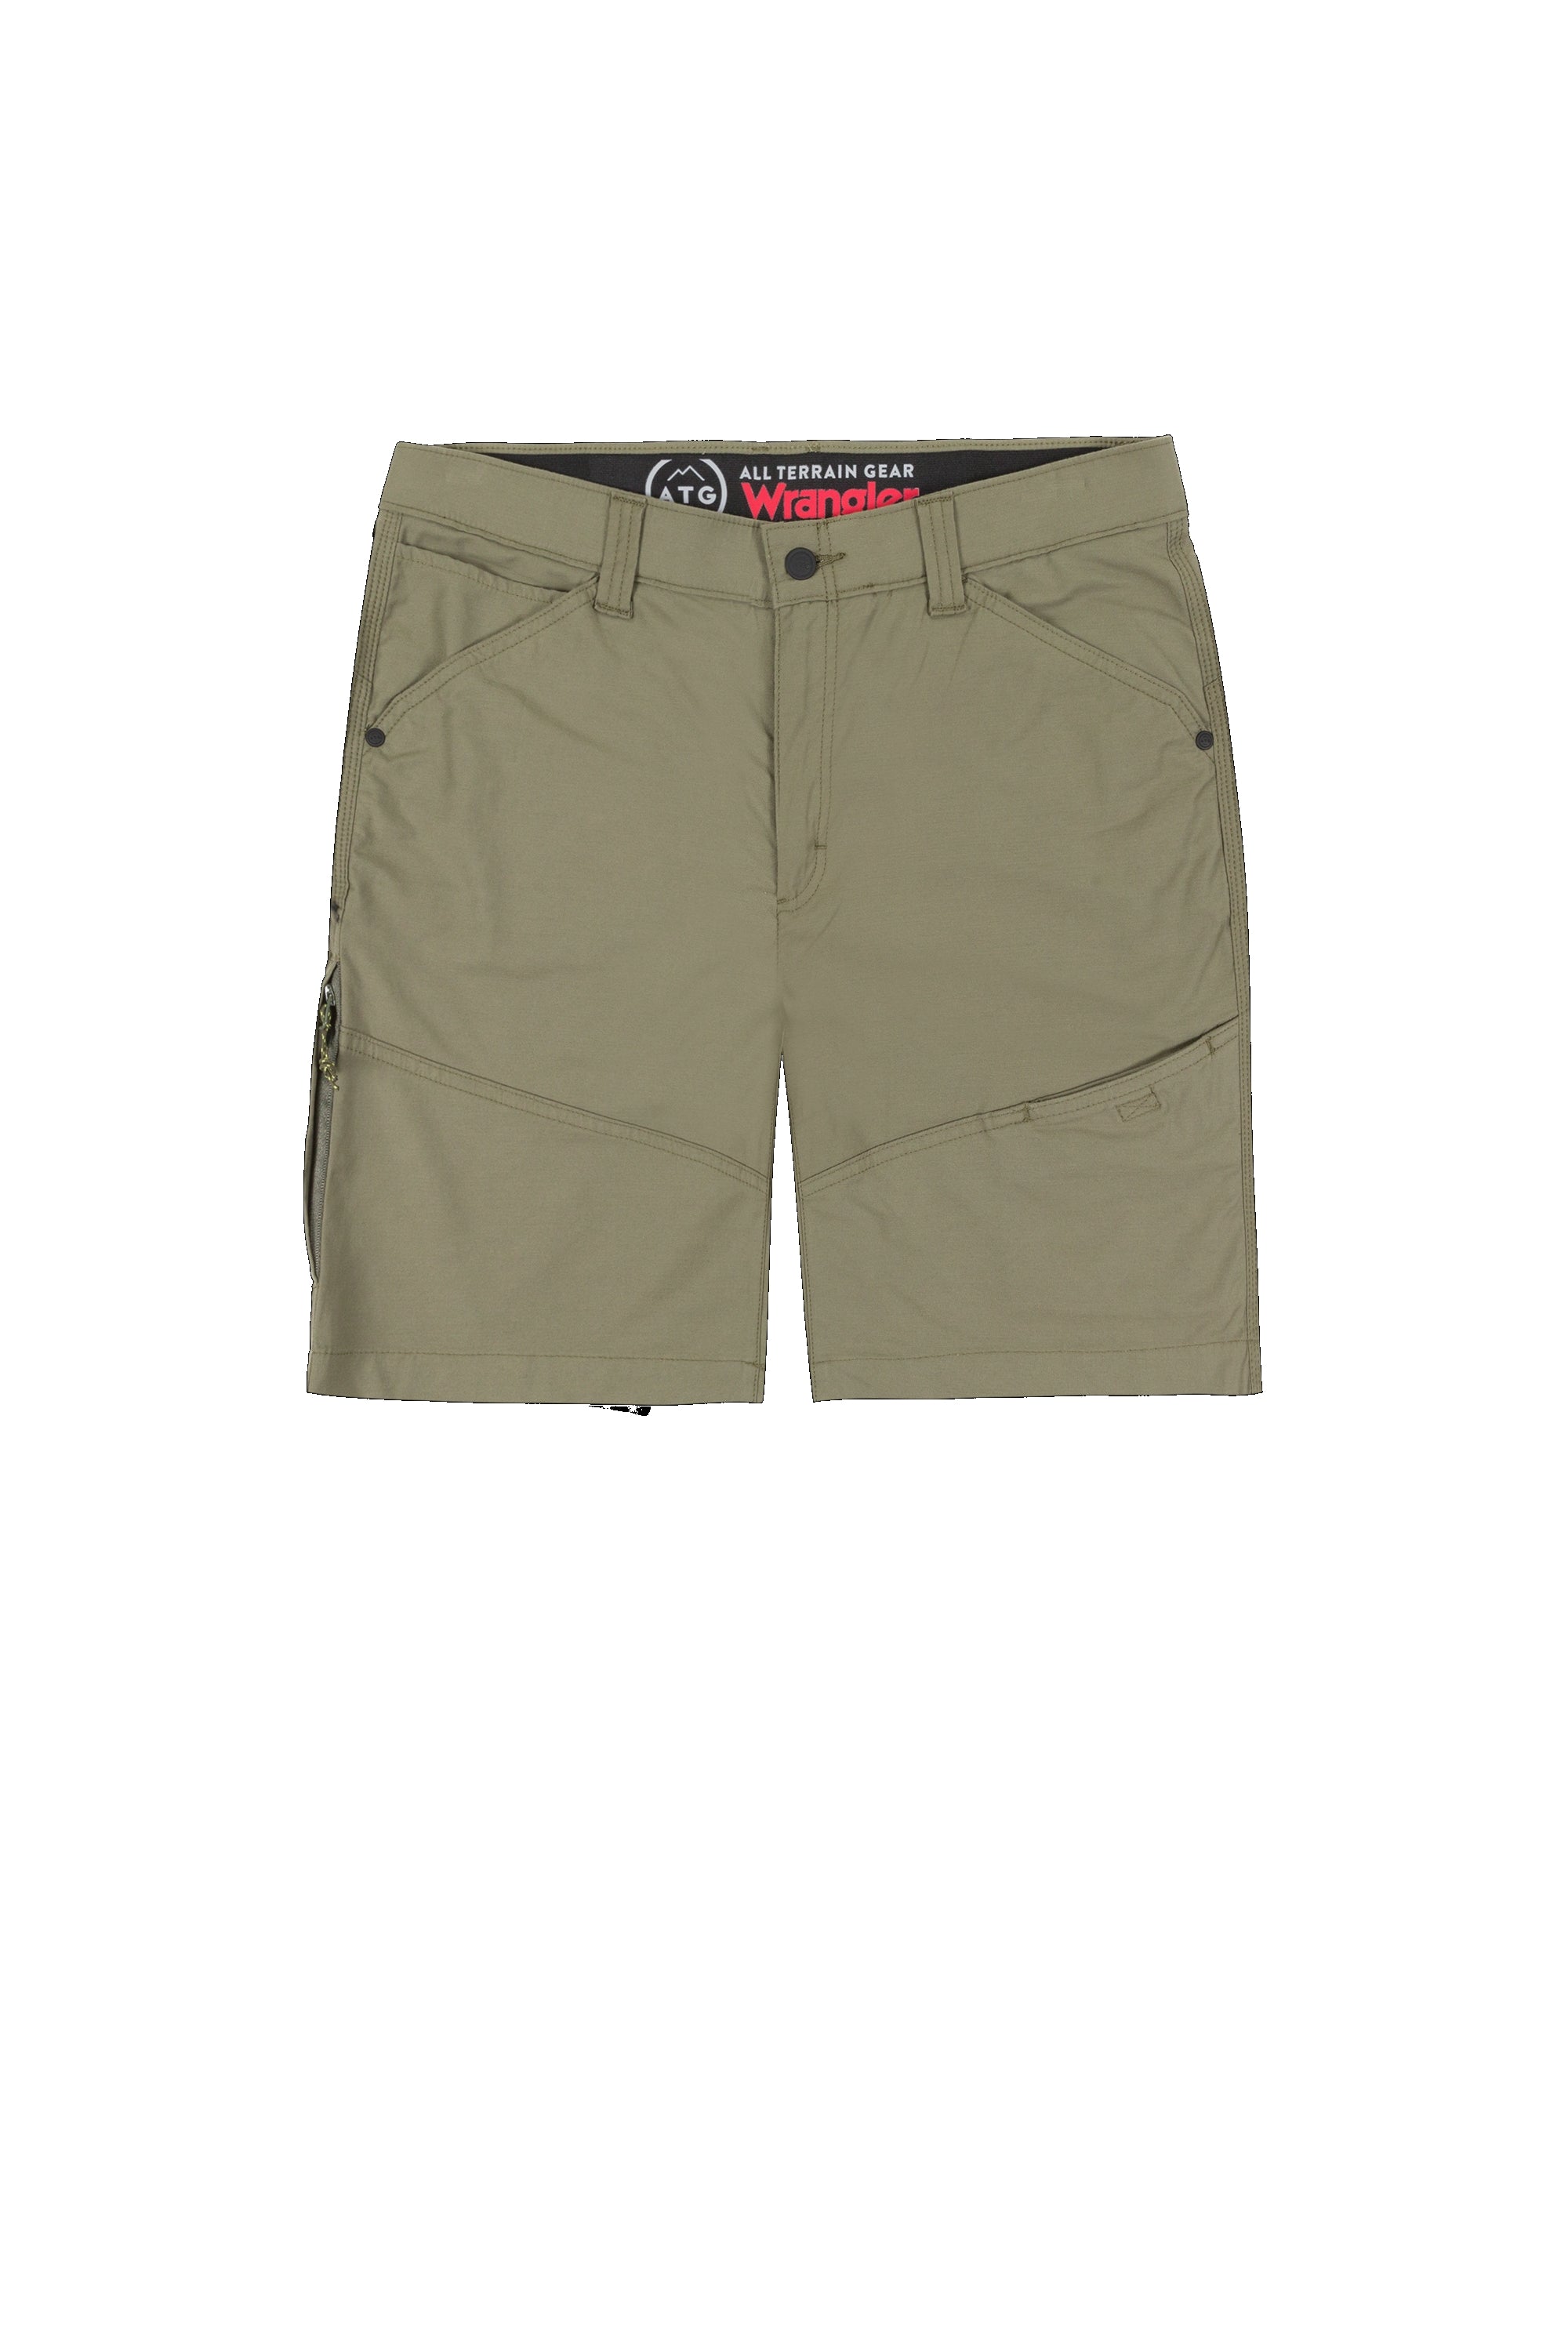 Rugged Trail Short in Dusty Olive Shorts Wrangler   